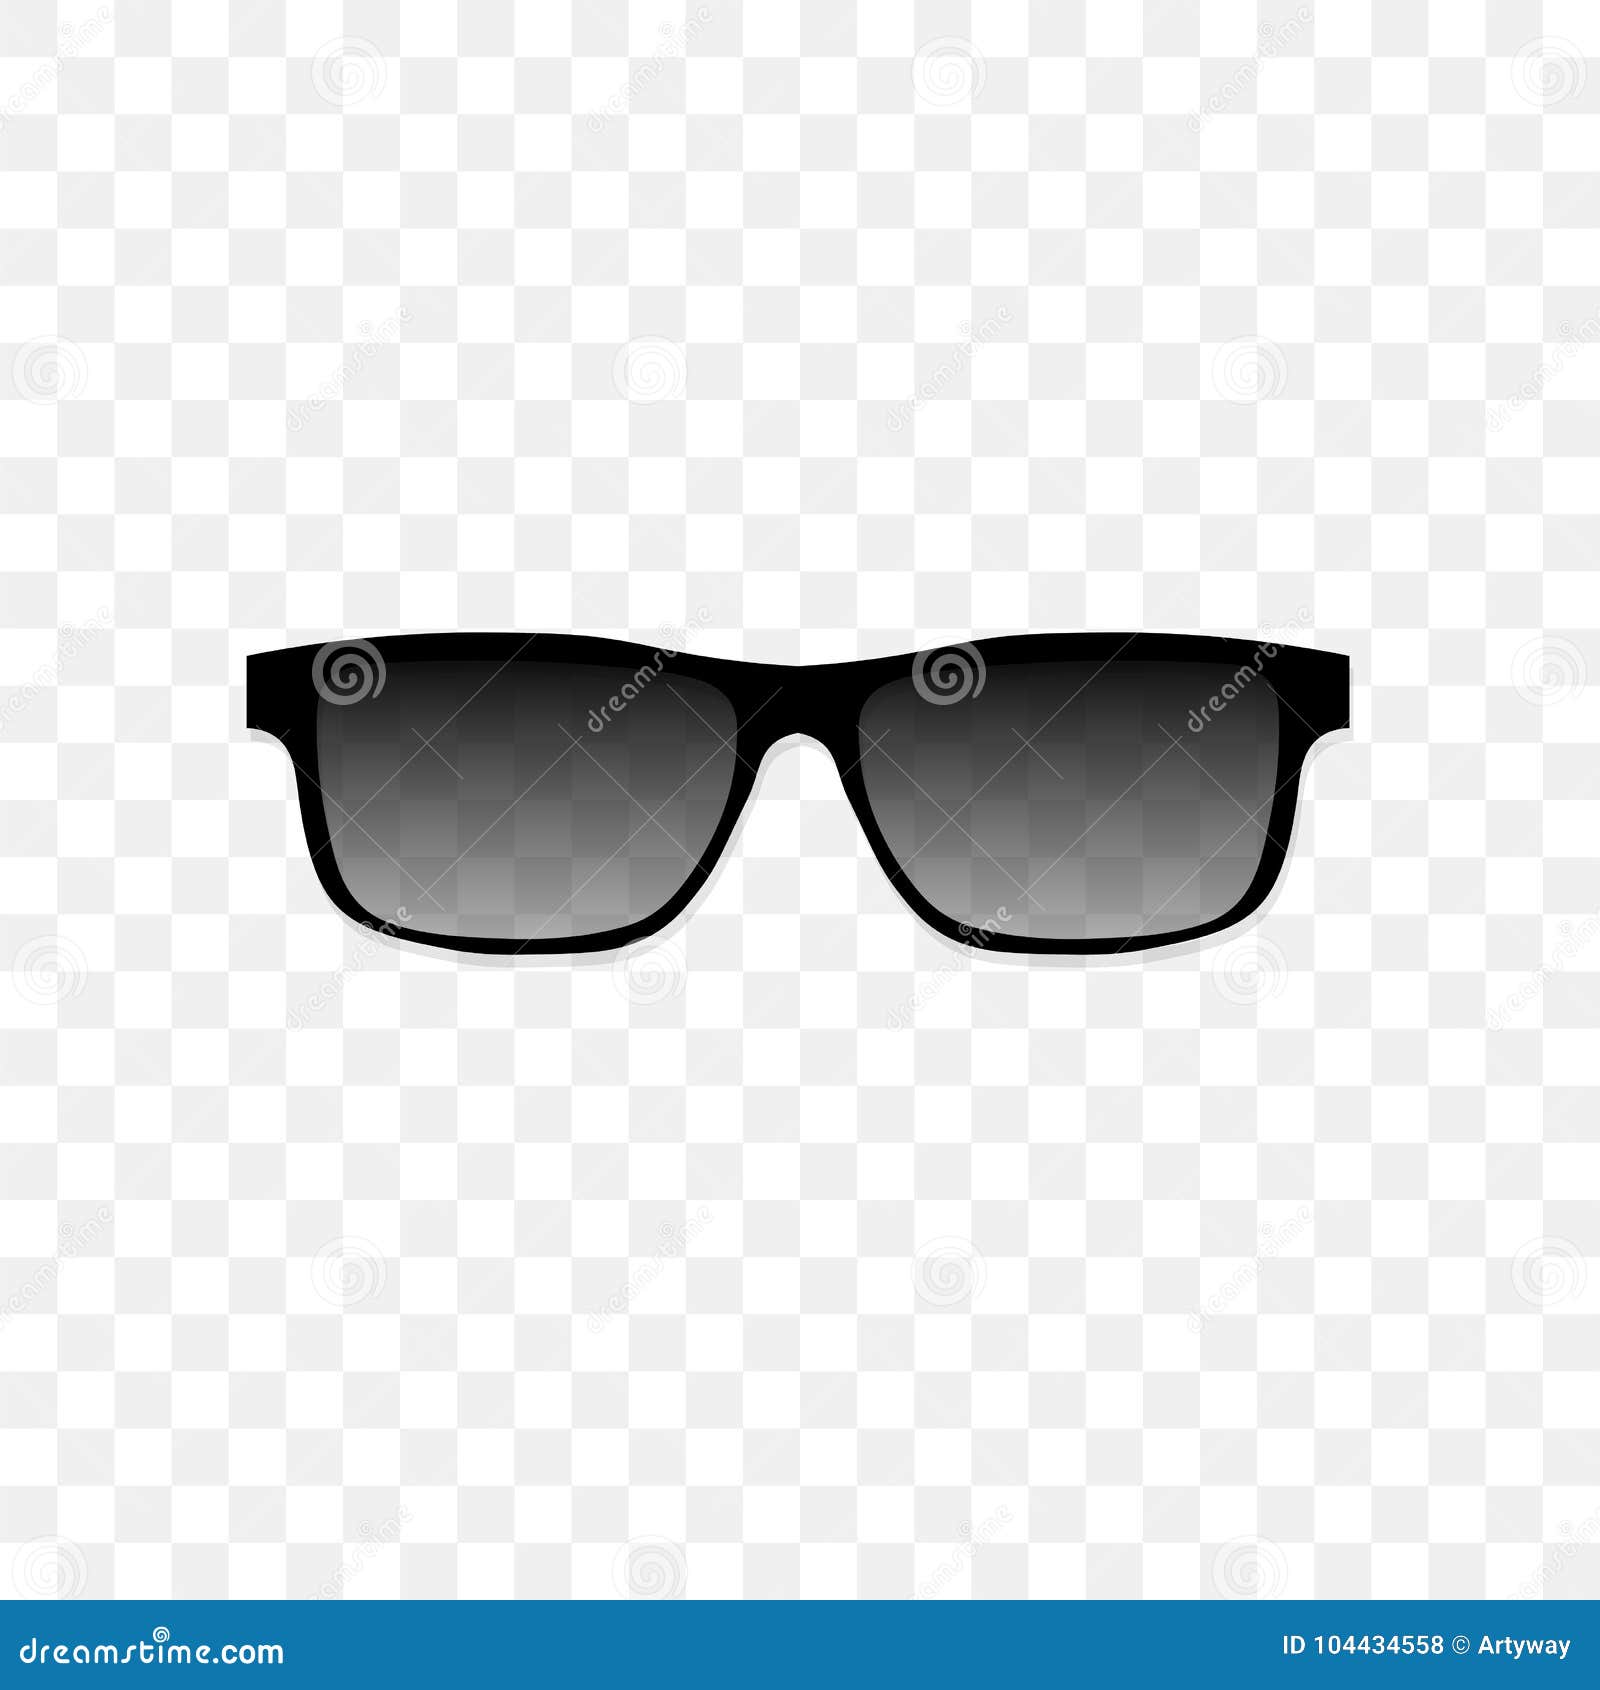 Share more than 238 transparent sunglasses png latest